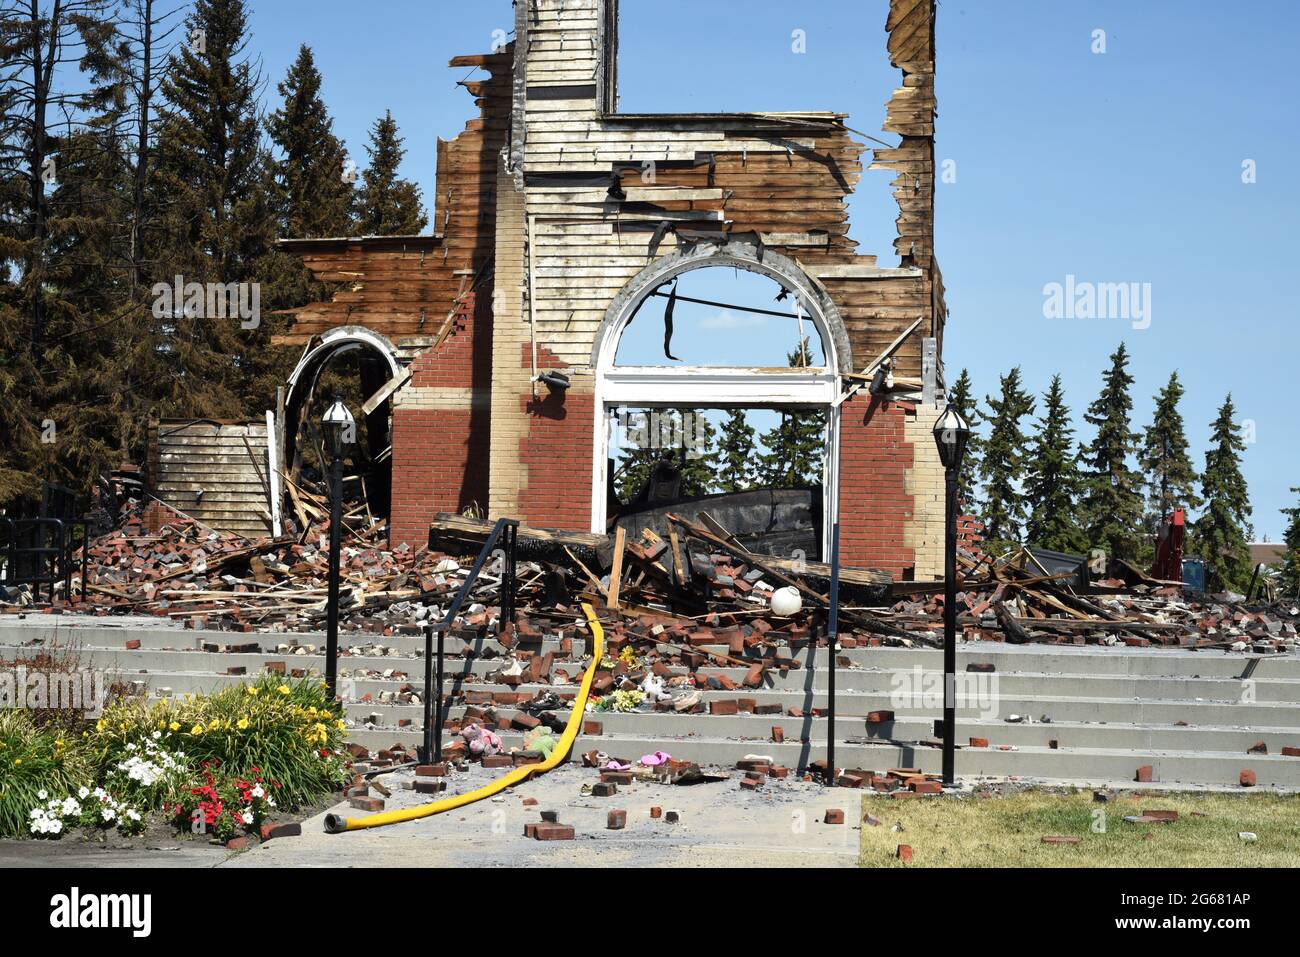 Morinville, Alberta, Canada, 3 July, 2021 - The ruins of the historic St. Jean Baptiste Catholic Church in Morinville stand following a suspicious fire on June 30. The fire was one of a string of recent church related vandalism incidents across Canada following the discovery of 215 unmarked graves at the site of a former Indigenous school in Kamloops, British Columbia.  Don Denton/Alamy Live News Stock Photo